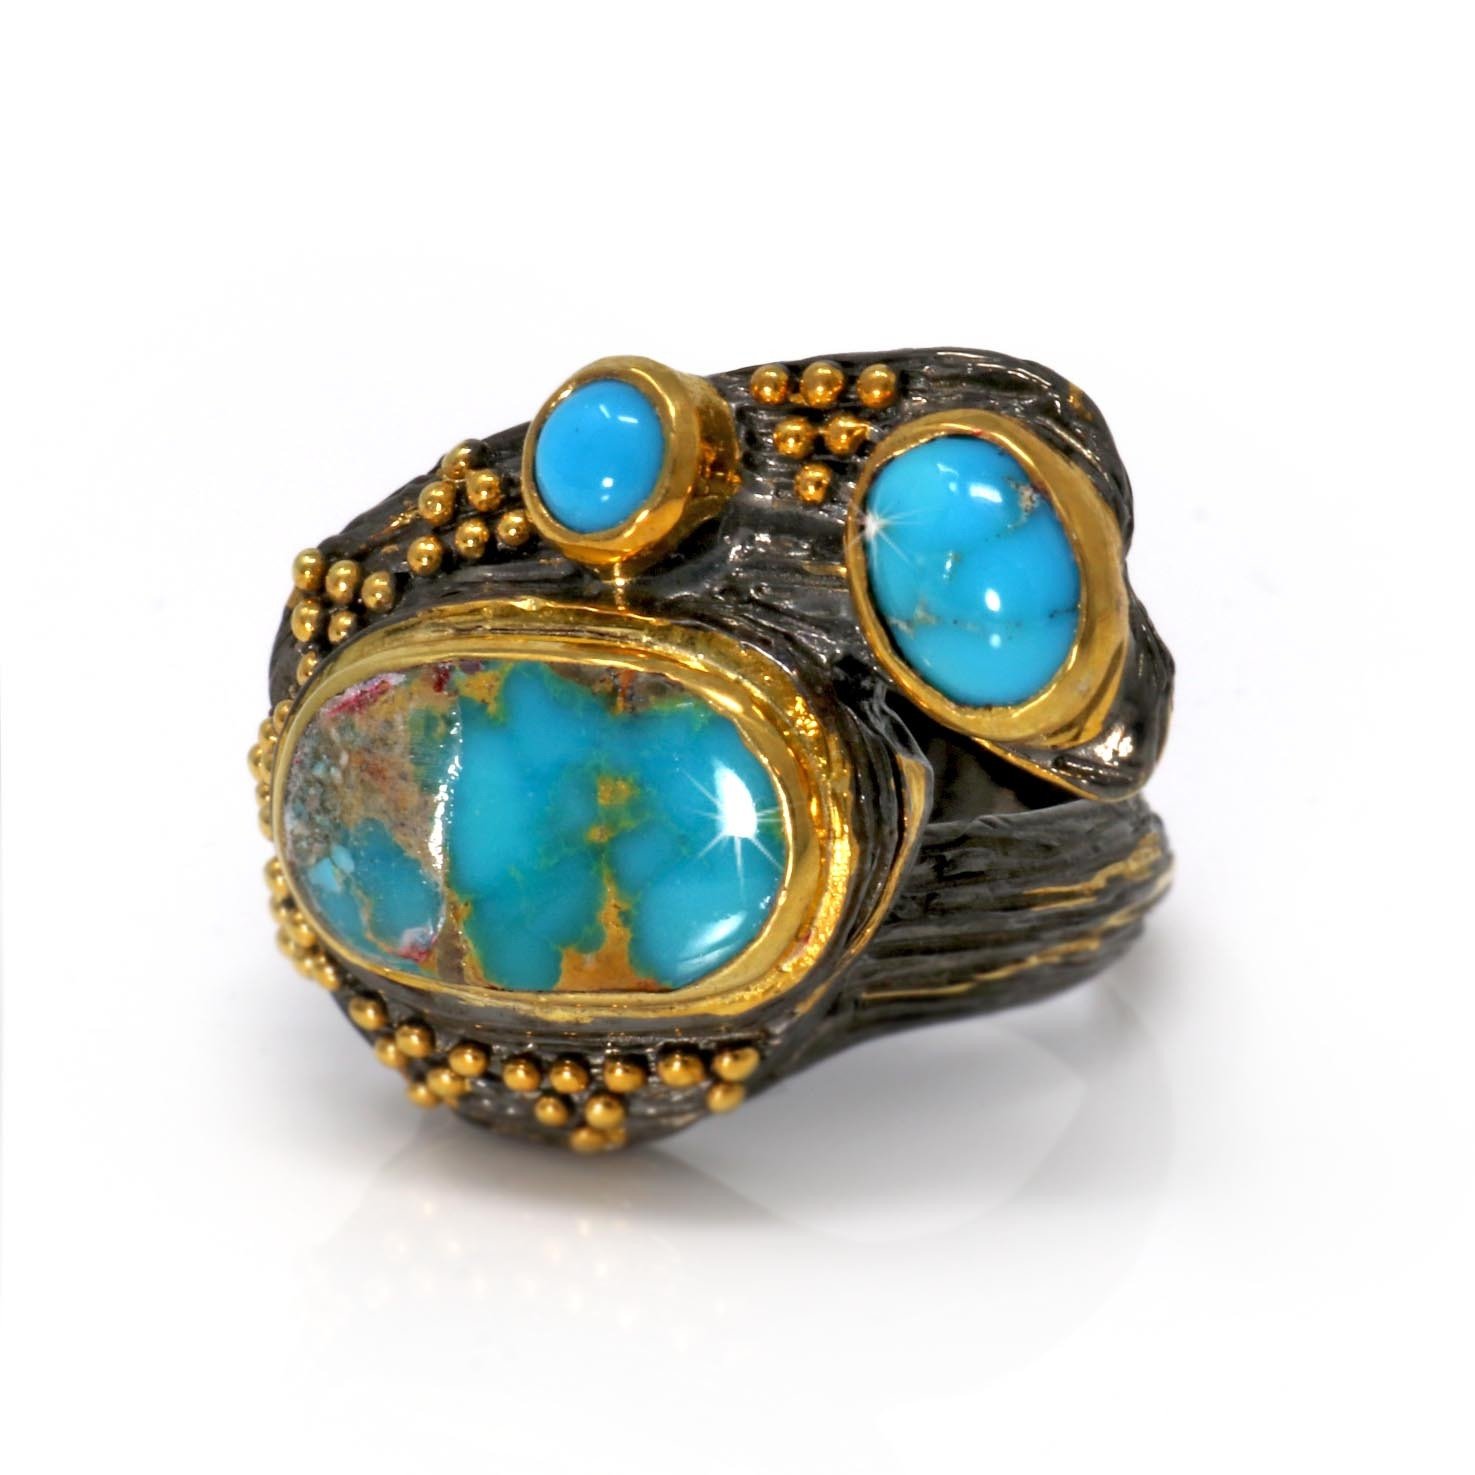 Persian Turquoise Ring Size 7.5 - 2 Oval Cabochons & 1 Round Cabochon With Gold Vermeil Bezels & Beading On Branching Wood Grain Stamped Oxidized Sterling Silver Band With Gold Accents